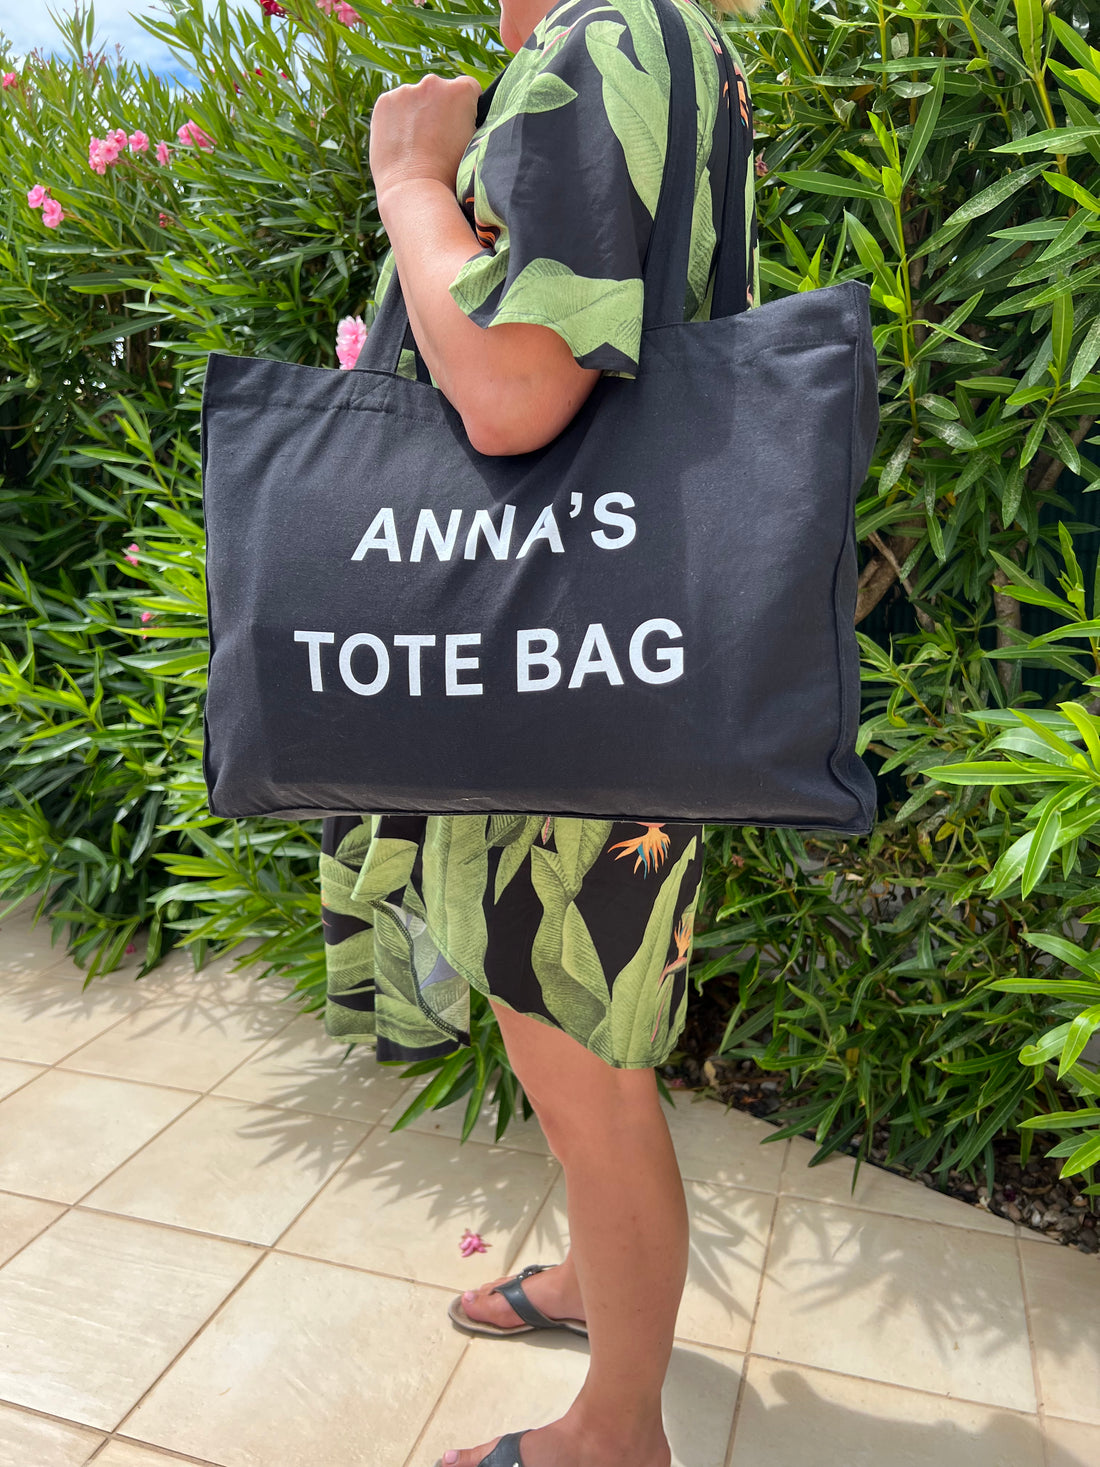 Let's Talk About Tote Bags